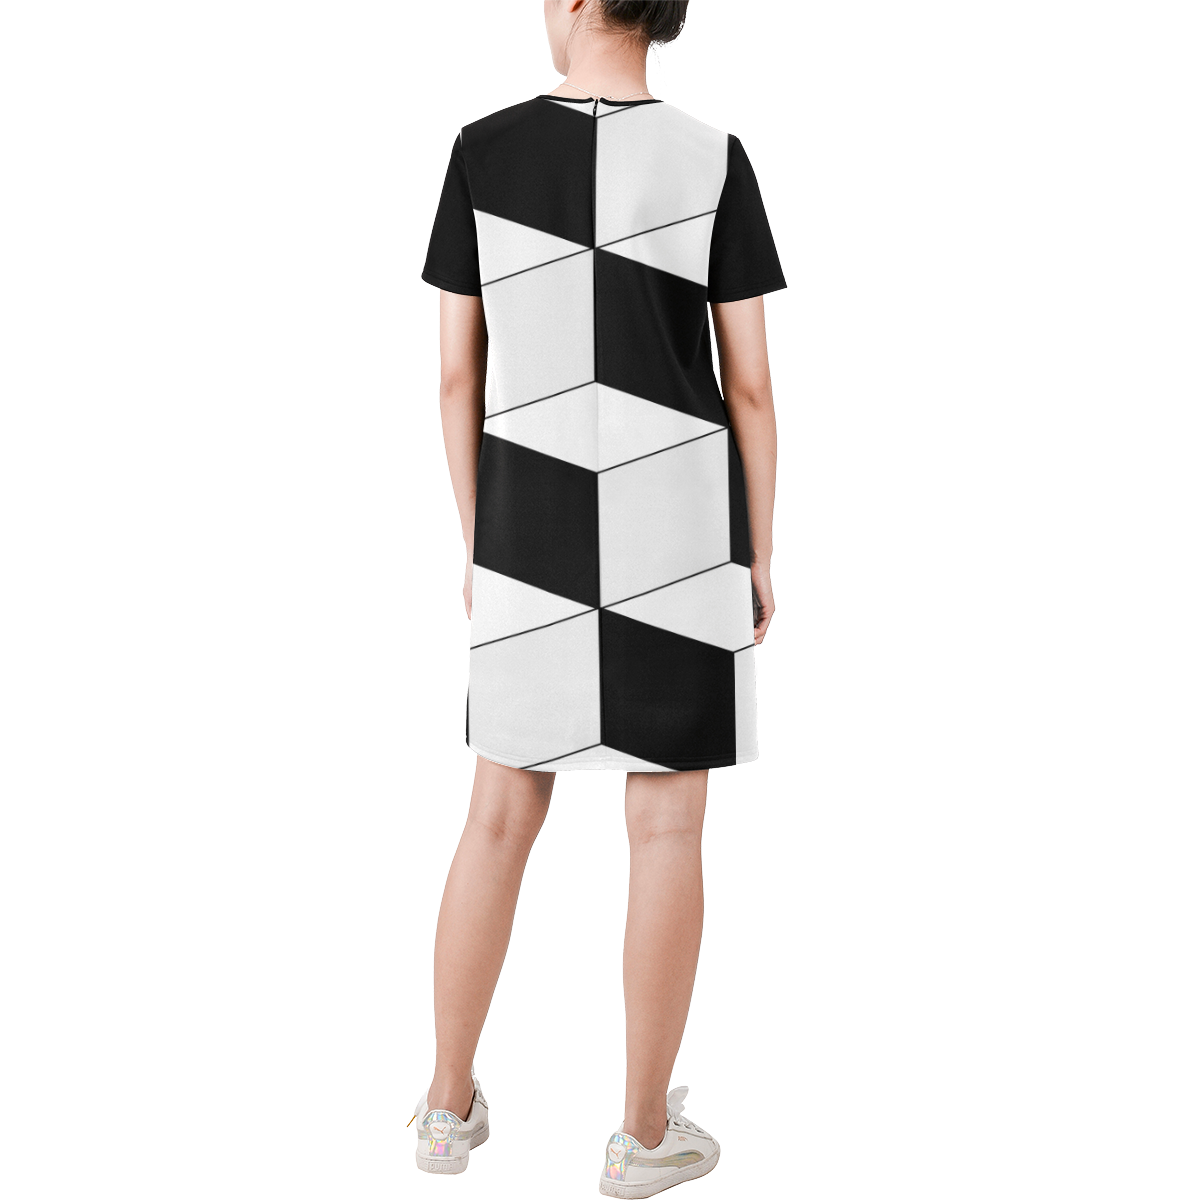 Abstract geometric pattern - black and white. Short-Sleeve Round Neck A-Line Dress (Model D47)